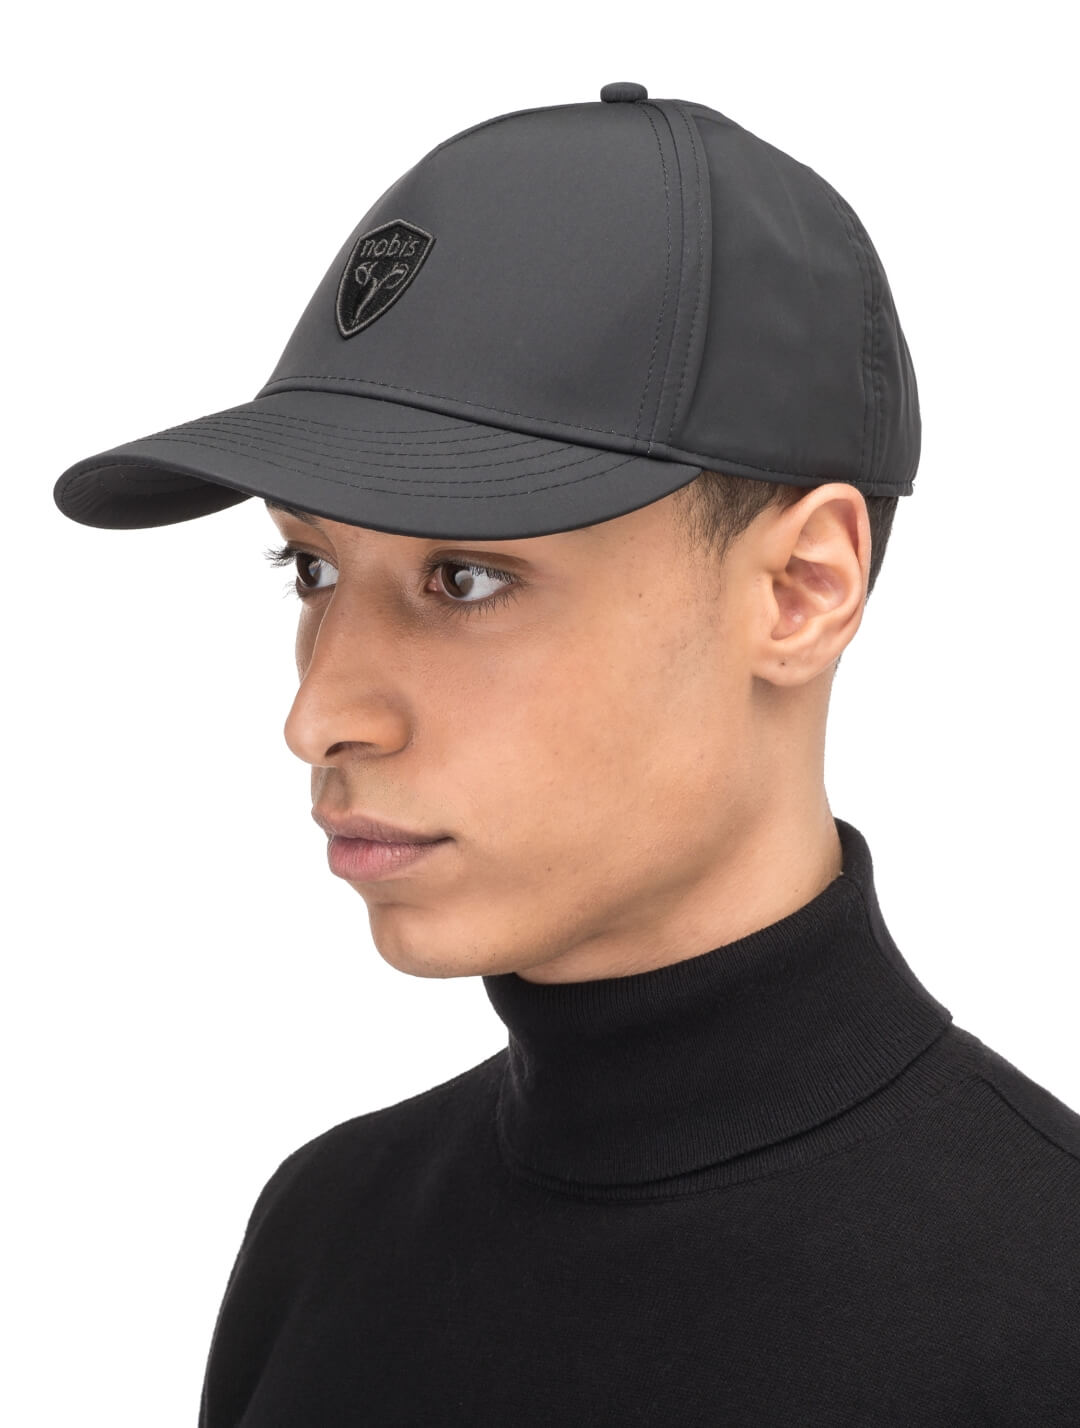 Satine Adjustable Cap in 5-panel construction, mid height crown, curved peak brim, and adjustable strap closure, in Black